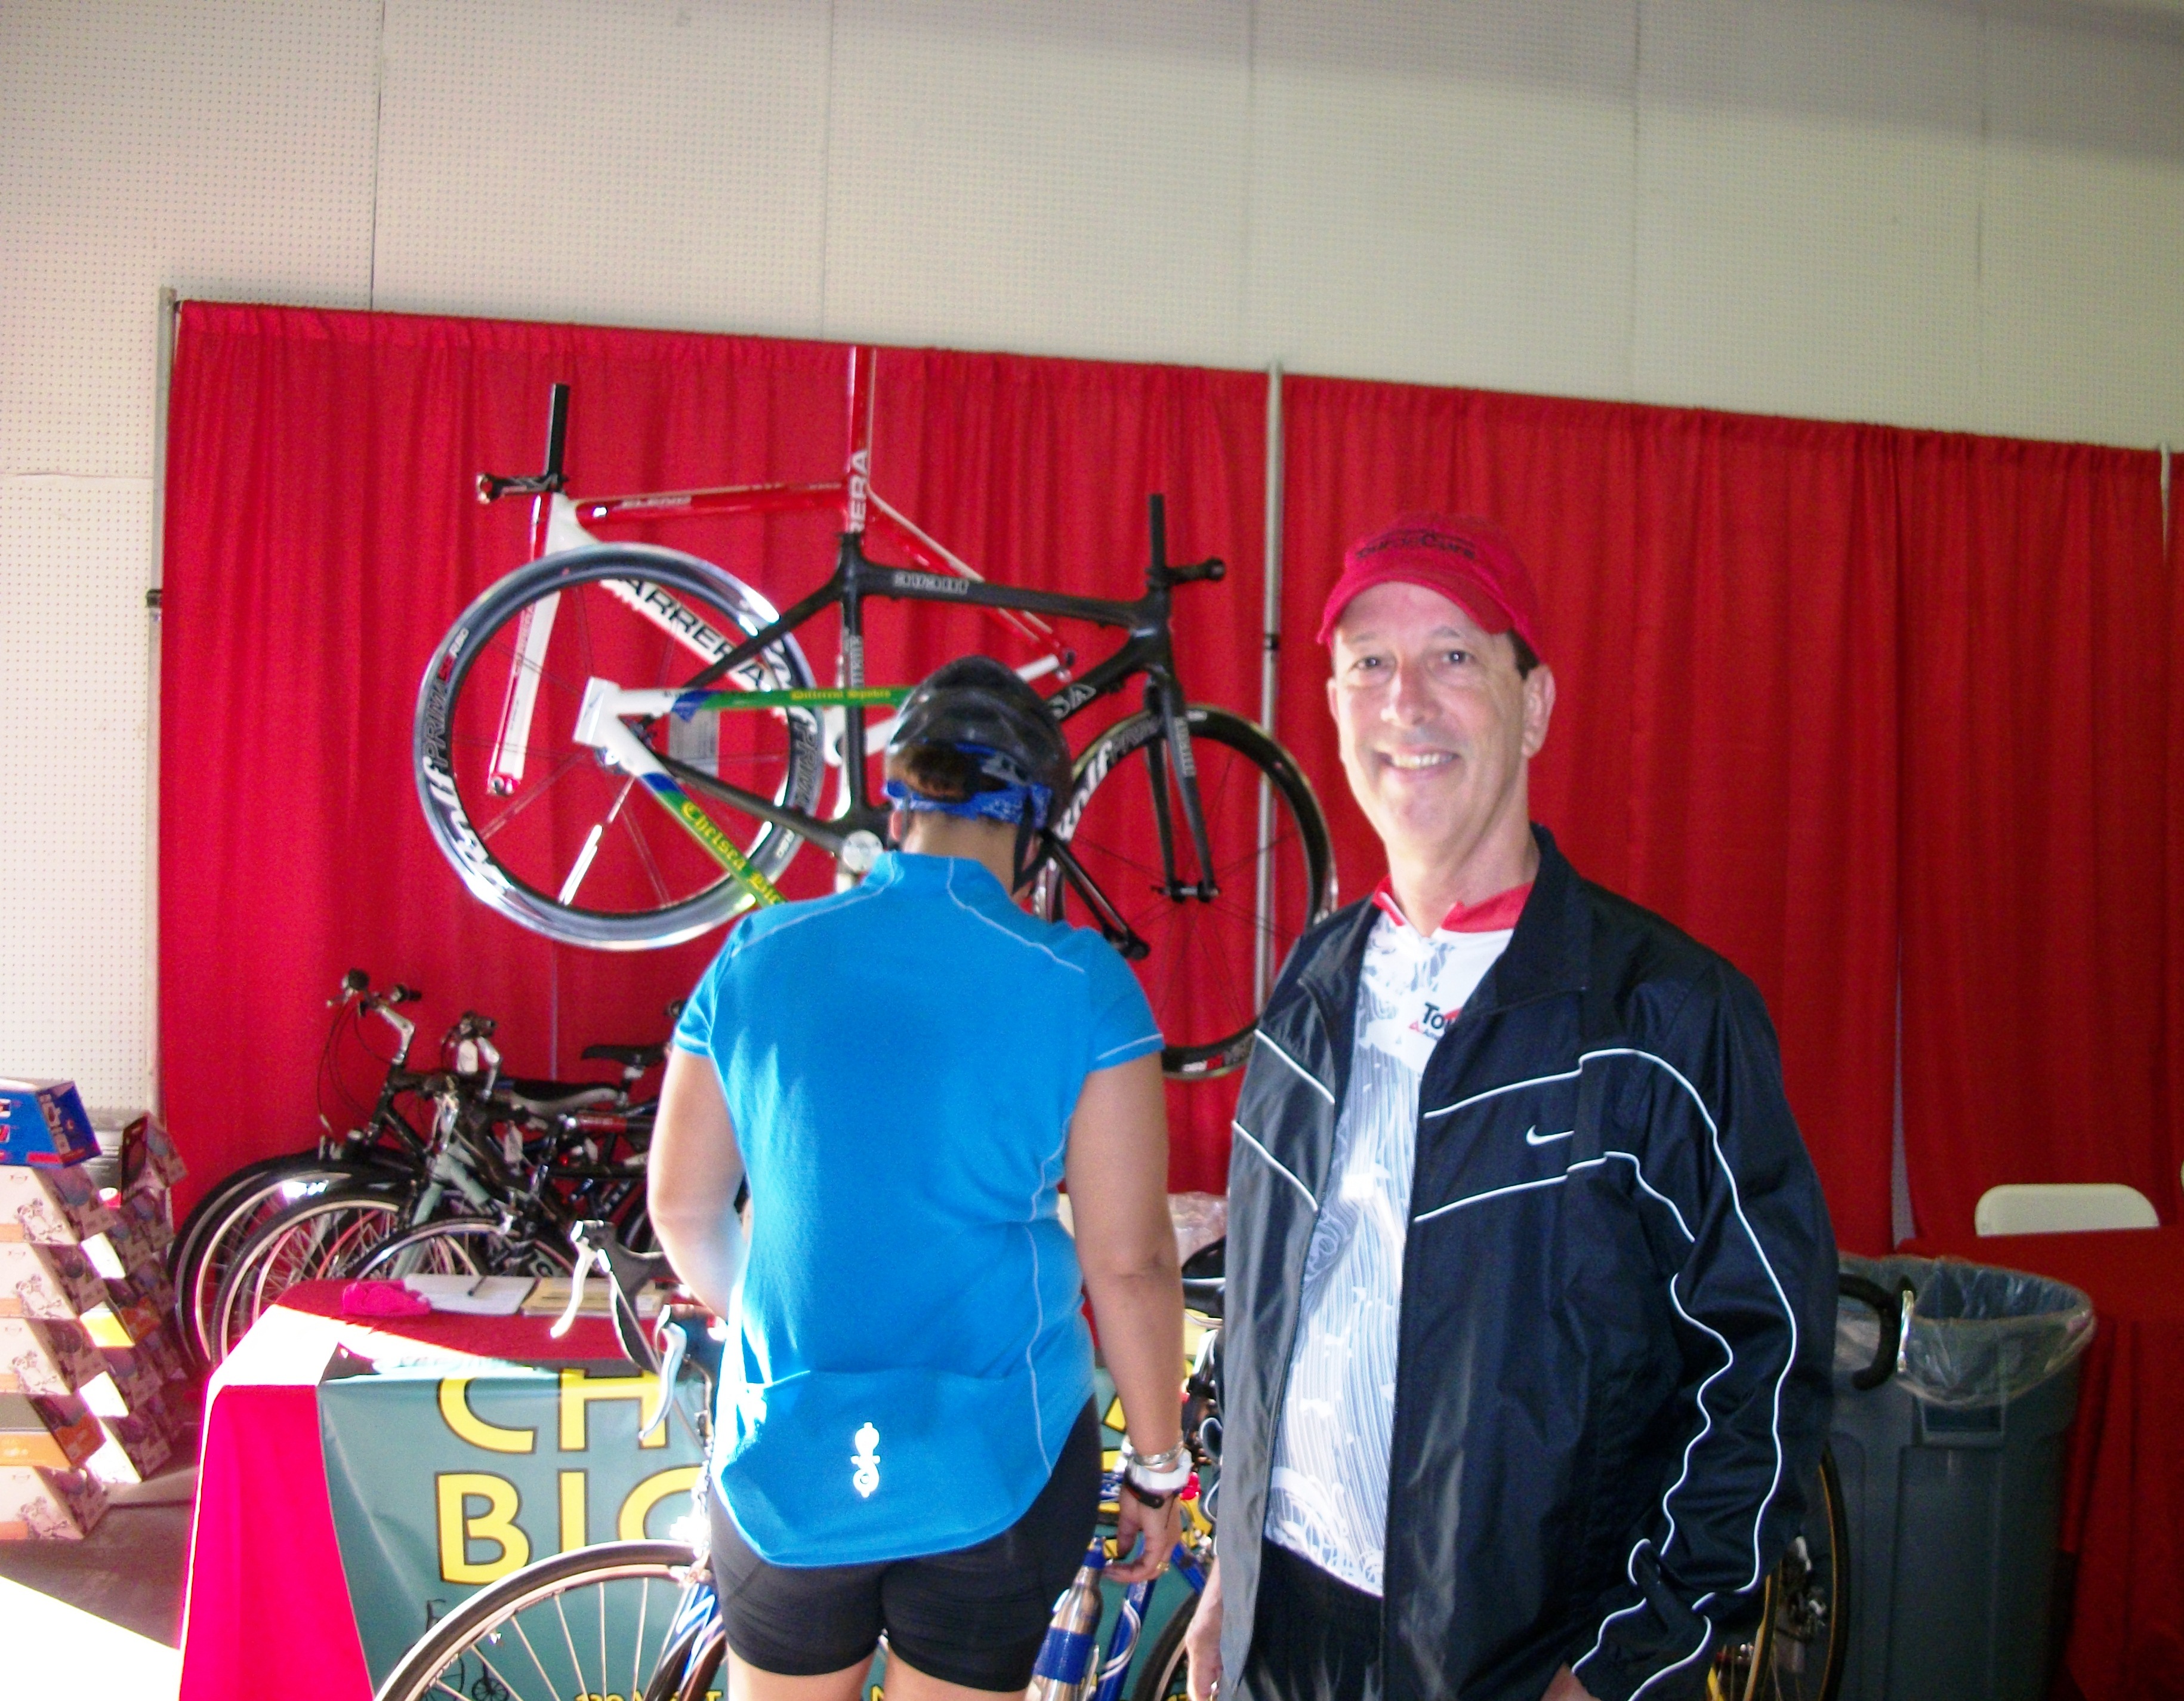 I'm stand next to the Chelsea Bicycles table at Pier 94